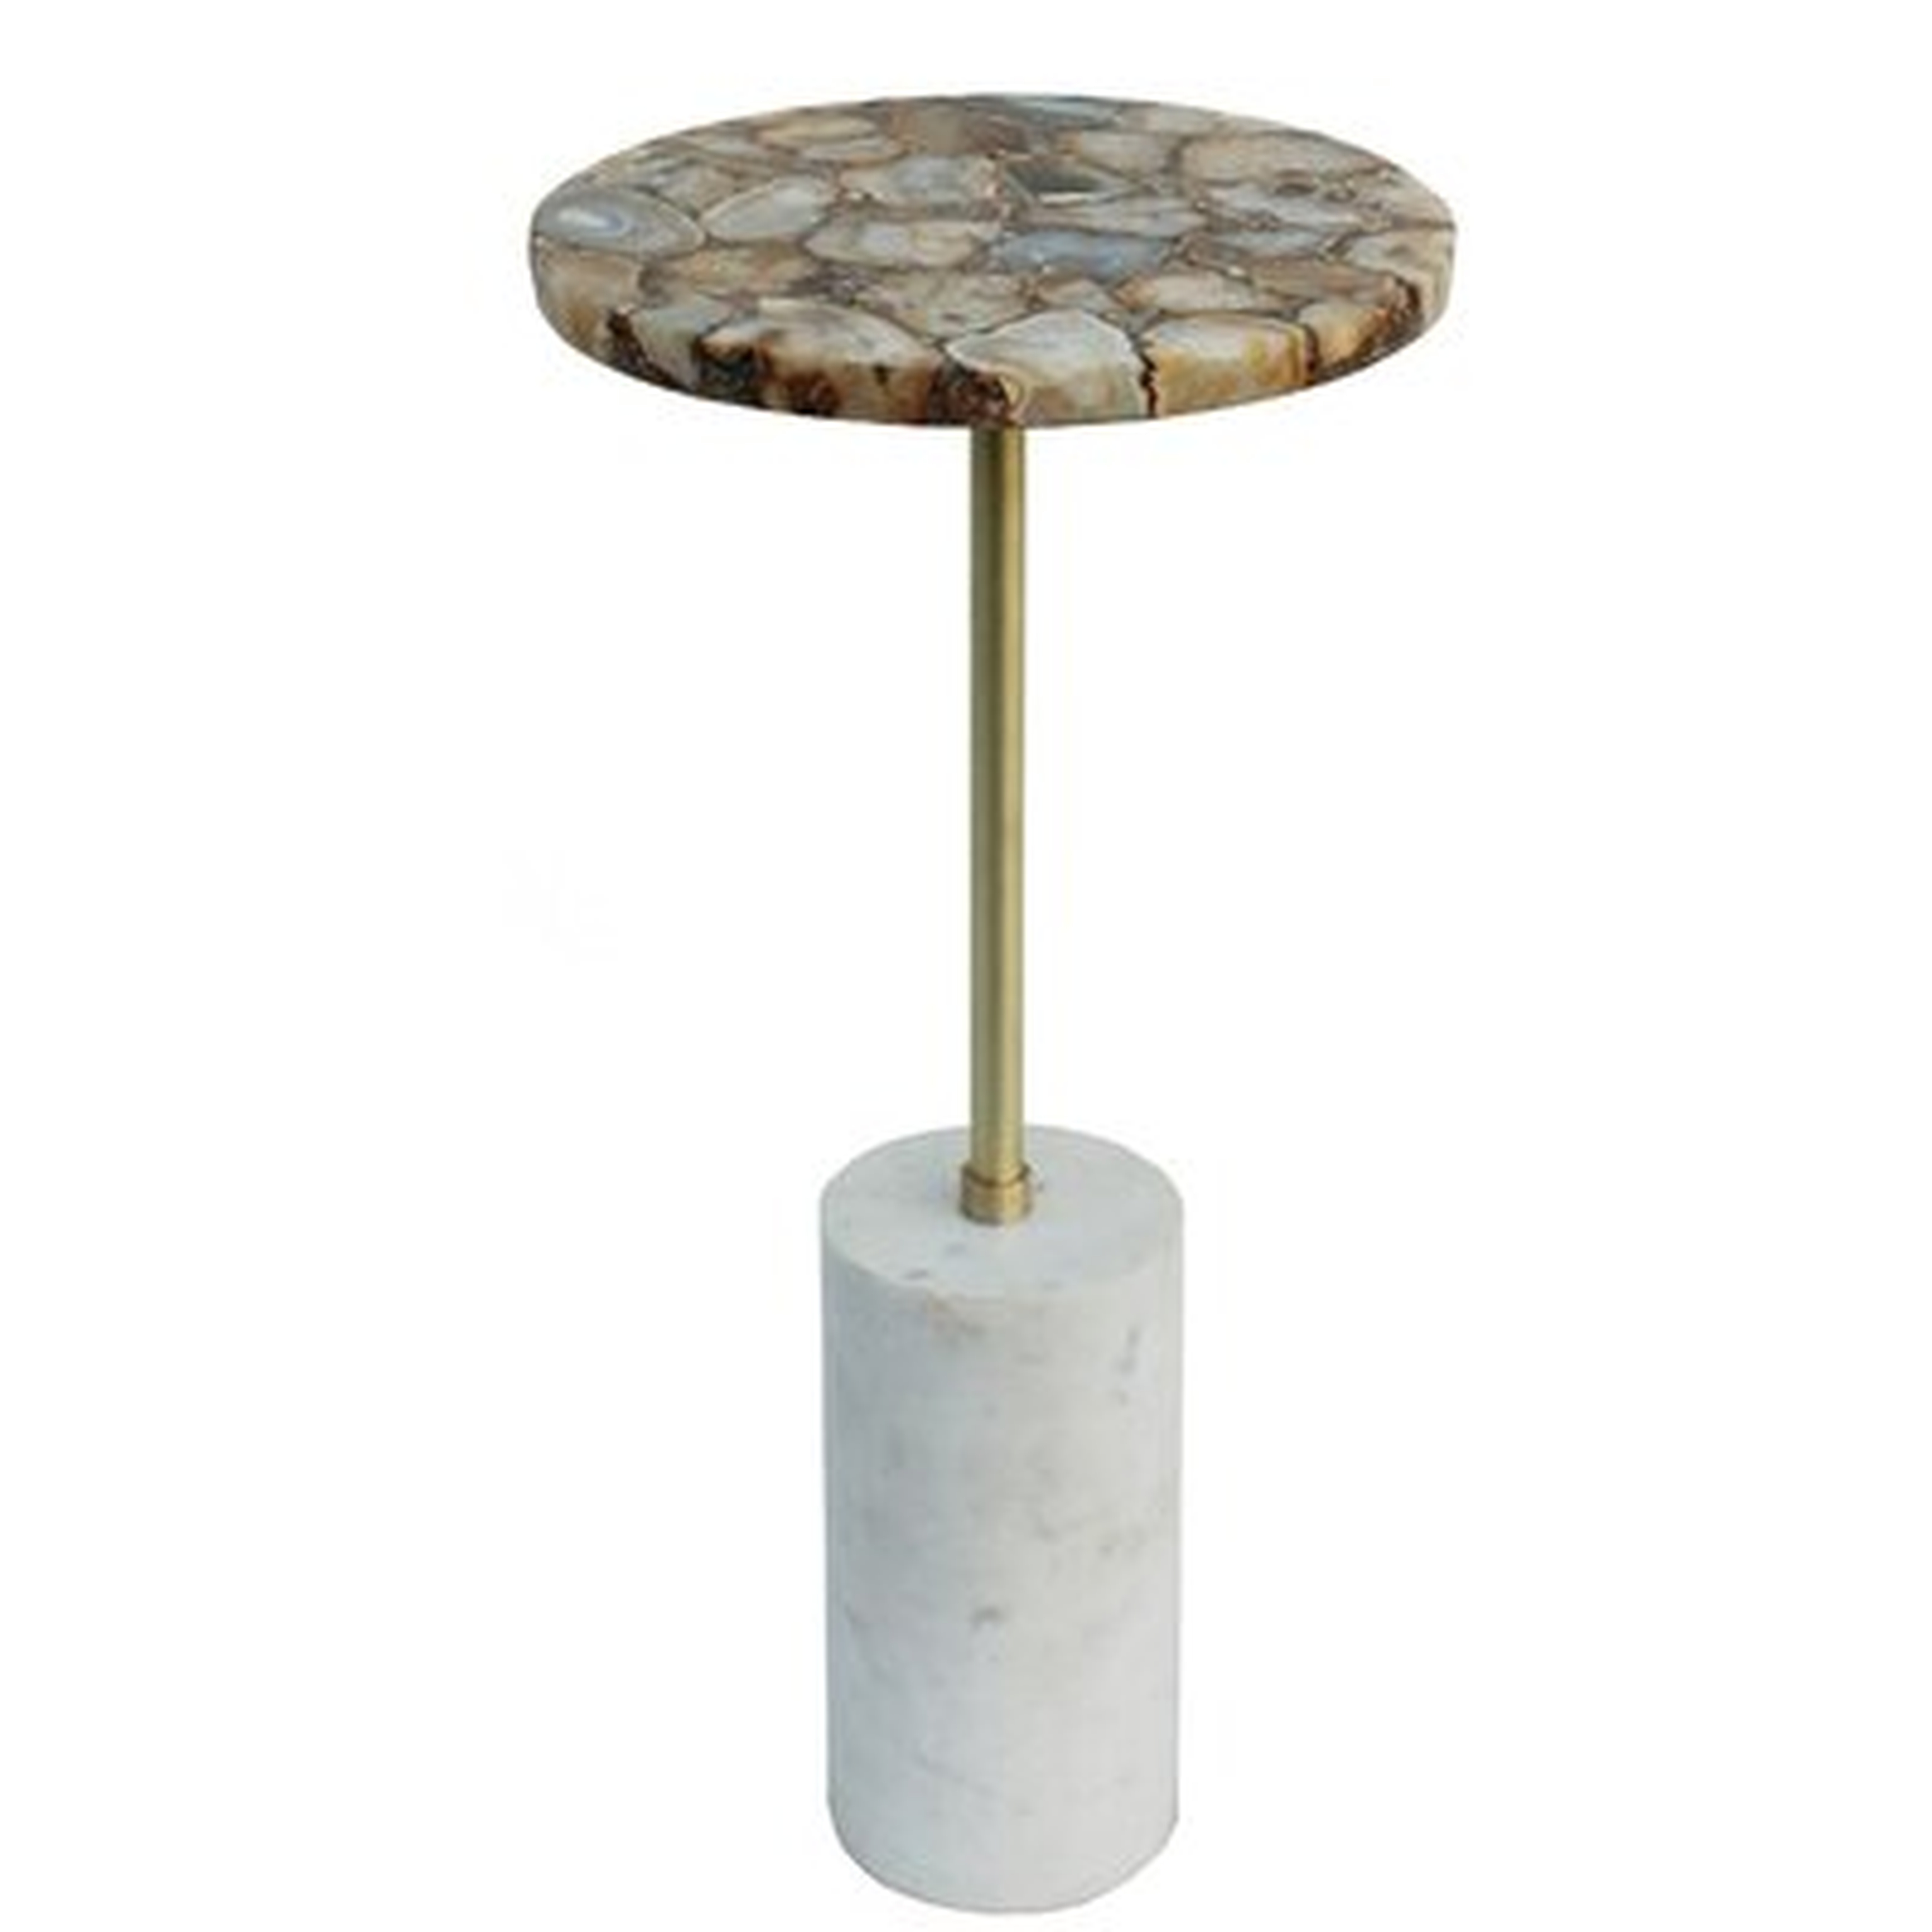 Suzanne Agate and Brass Side Table with Cylindrical Marble Base - Matte Brass, White Marble - Wayfair